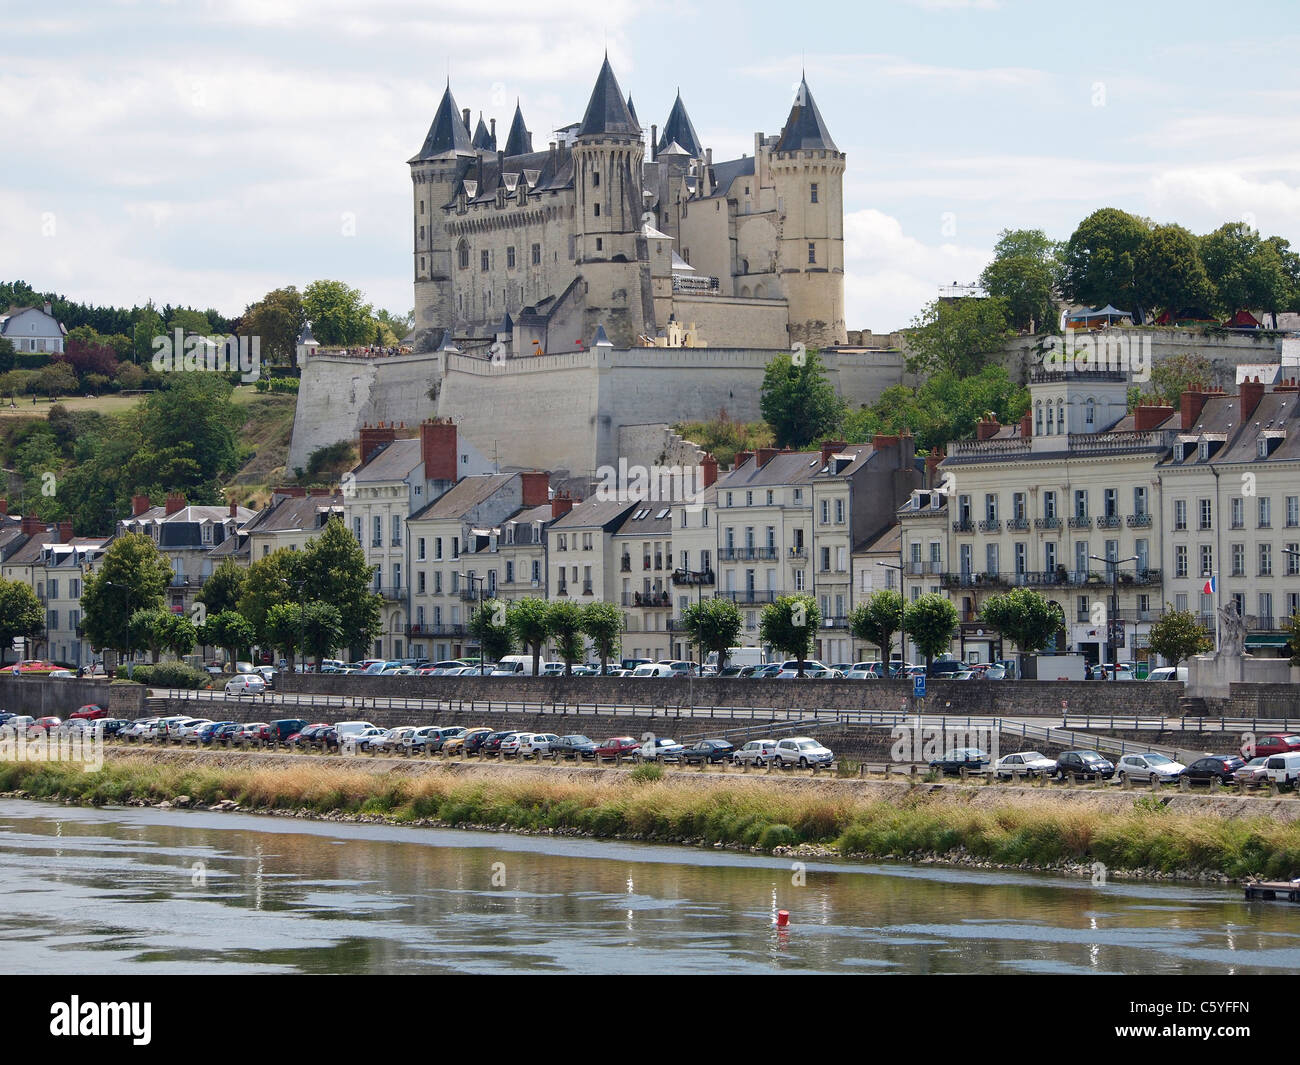 The castle of Saumur rises above the town on the bank of the Loire river, France Stock Photo